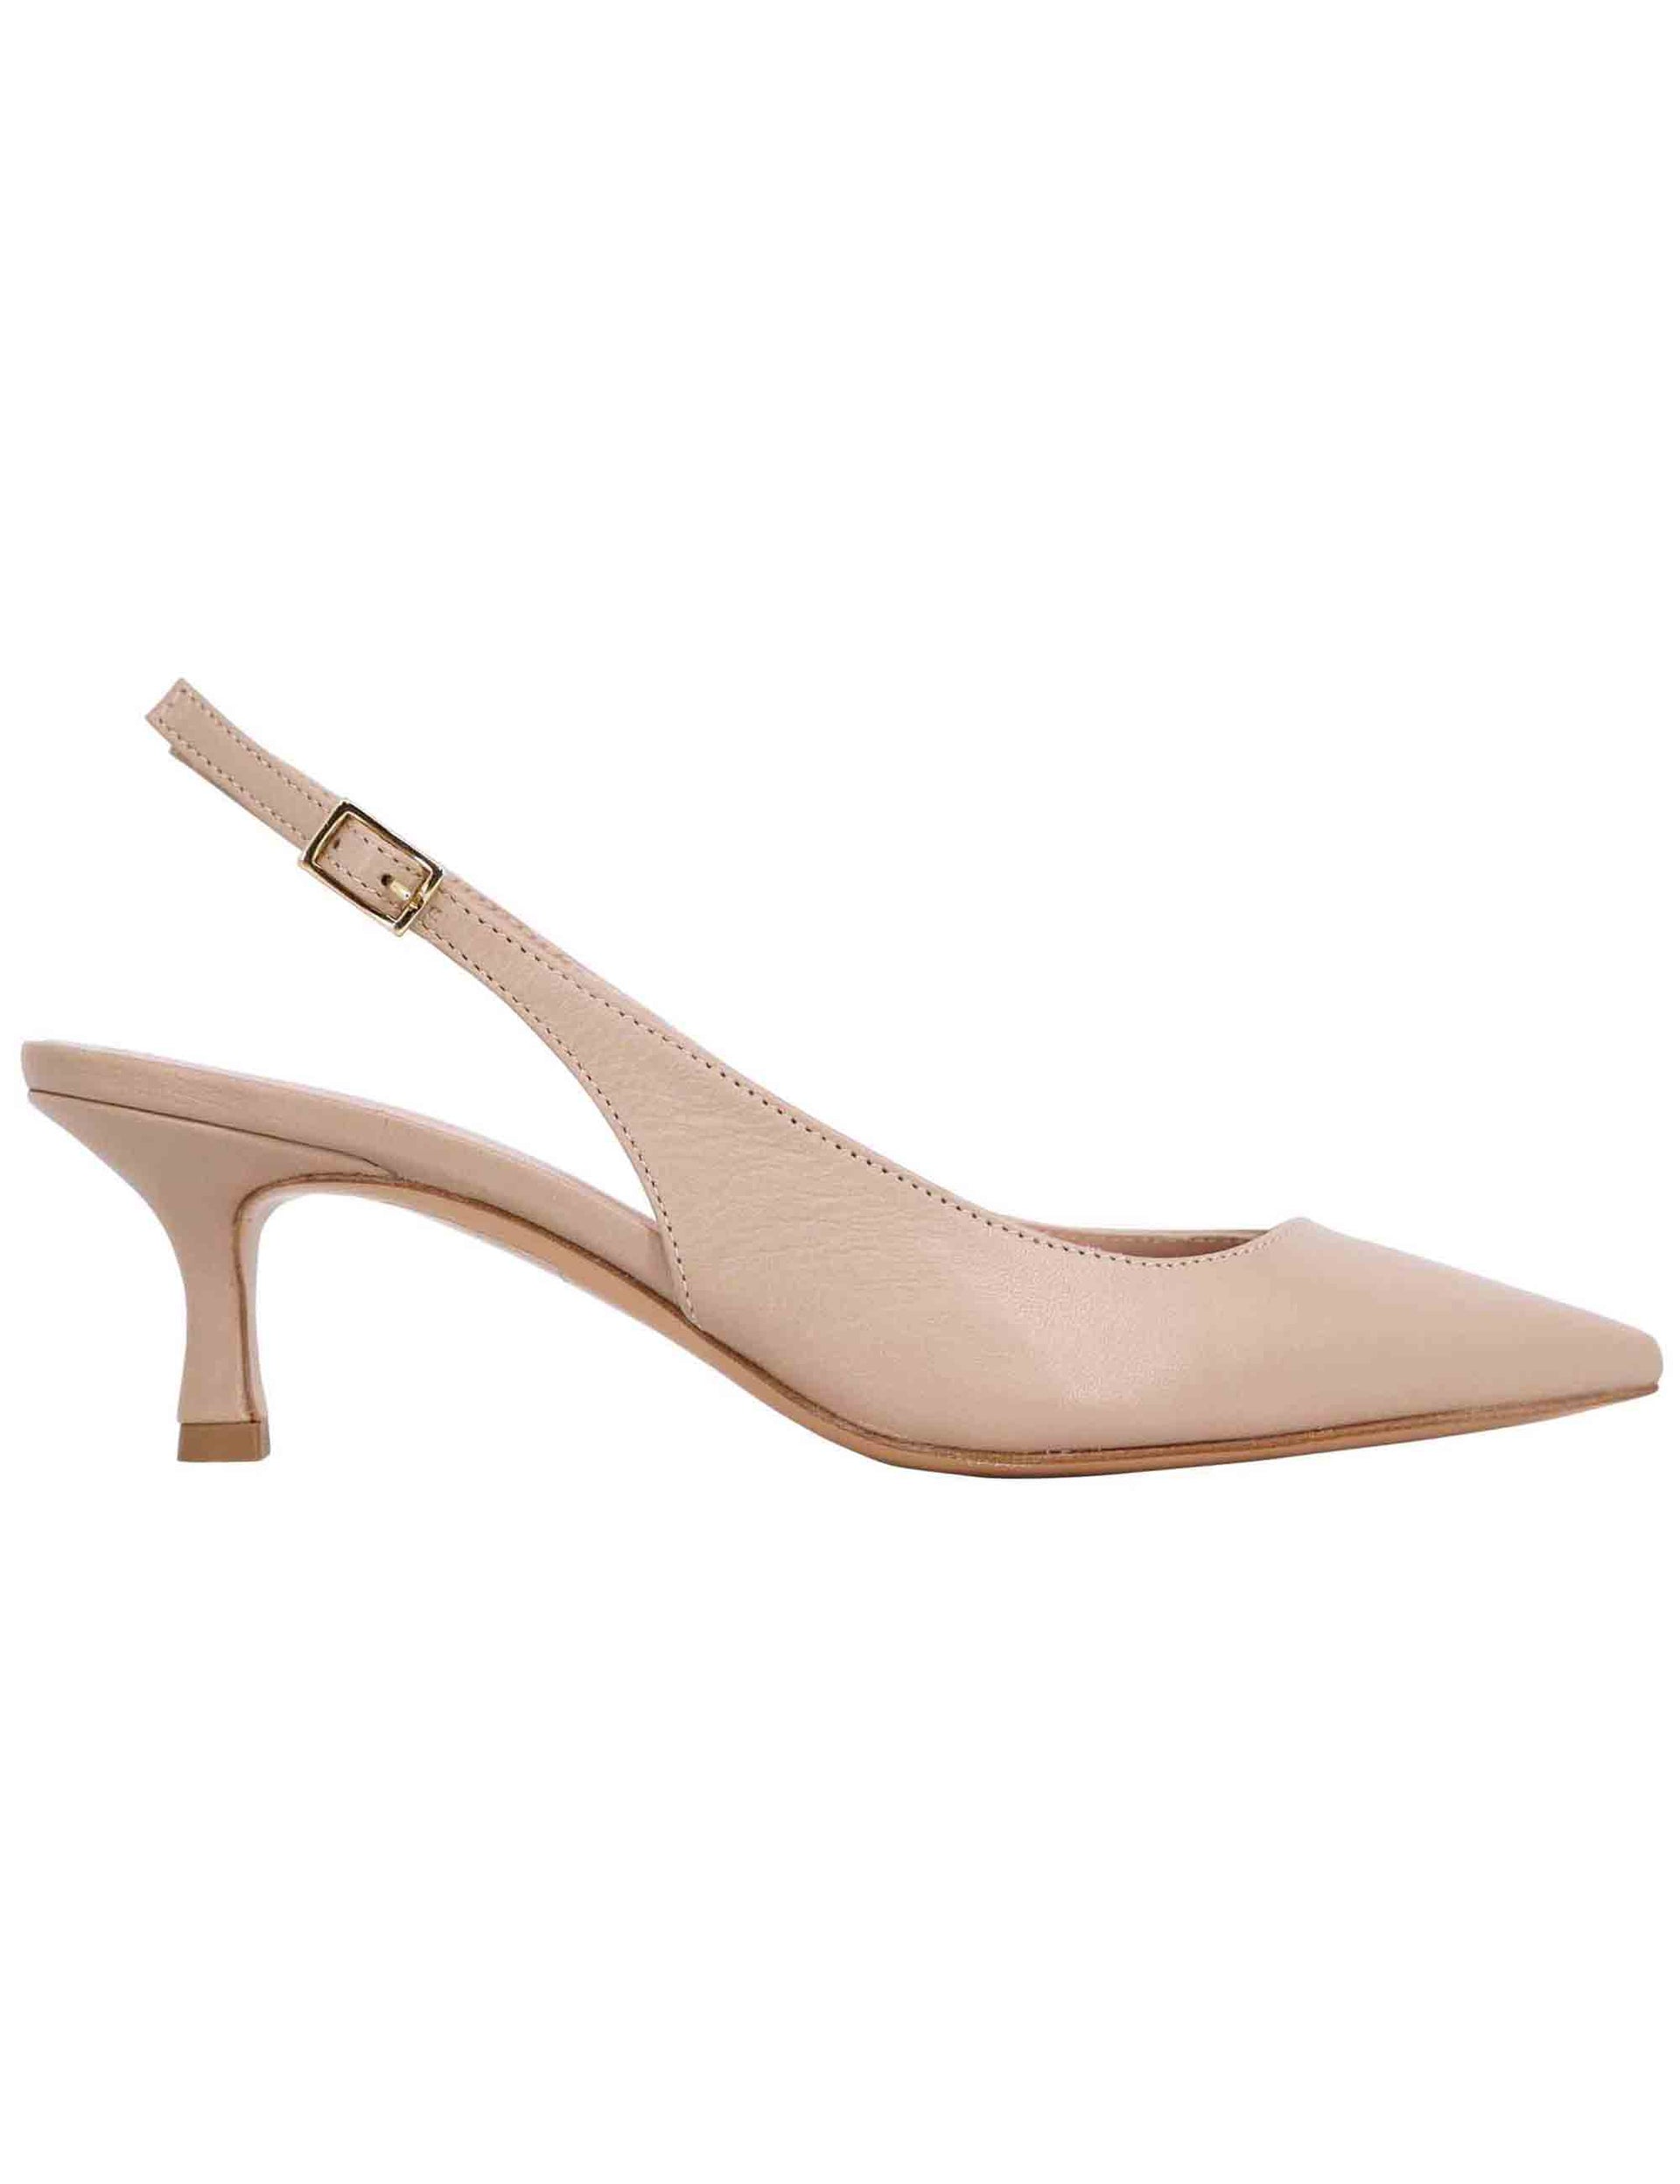 Decollete slingback donna in pelle taupe tacco basso